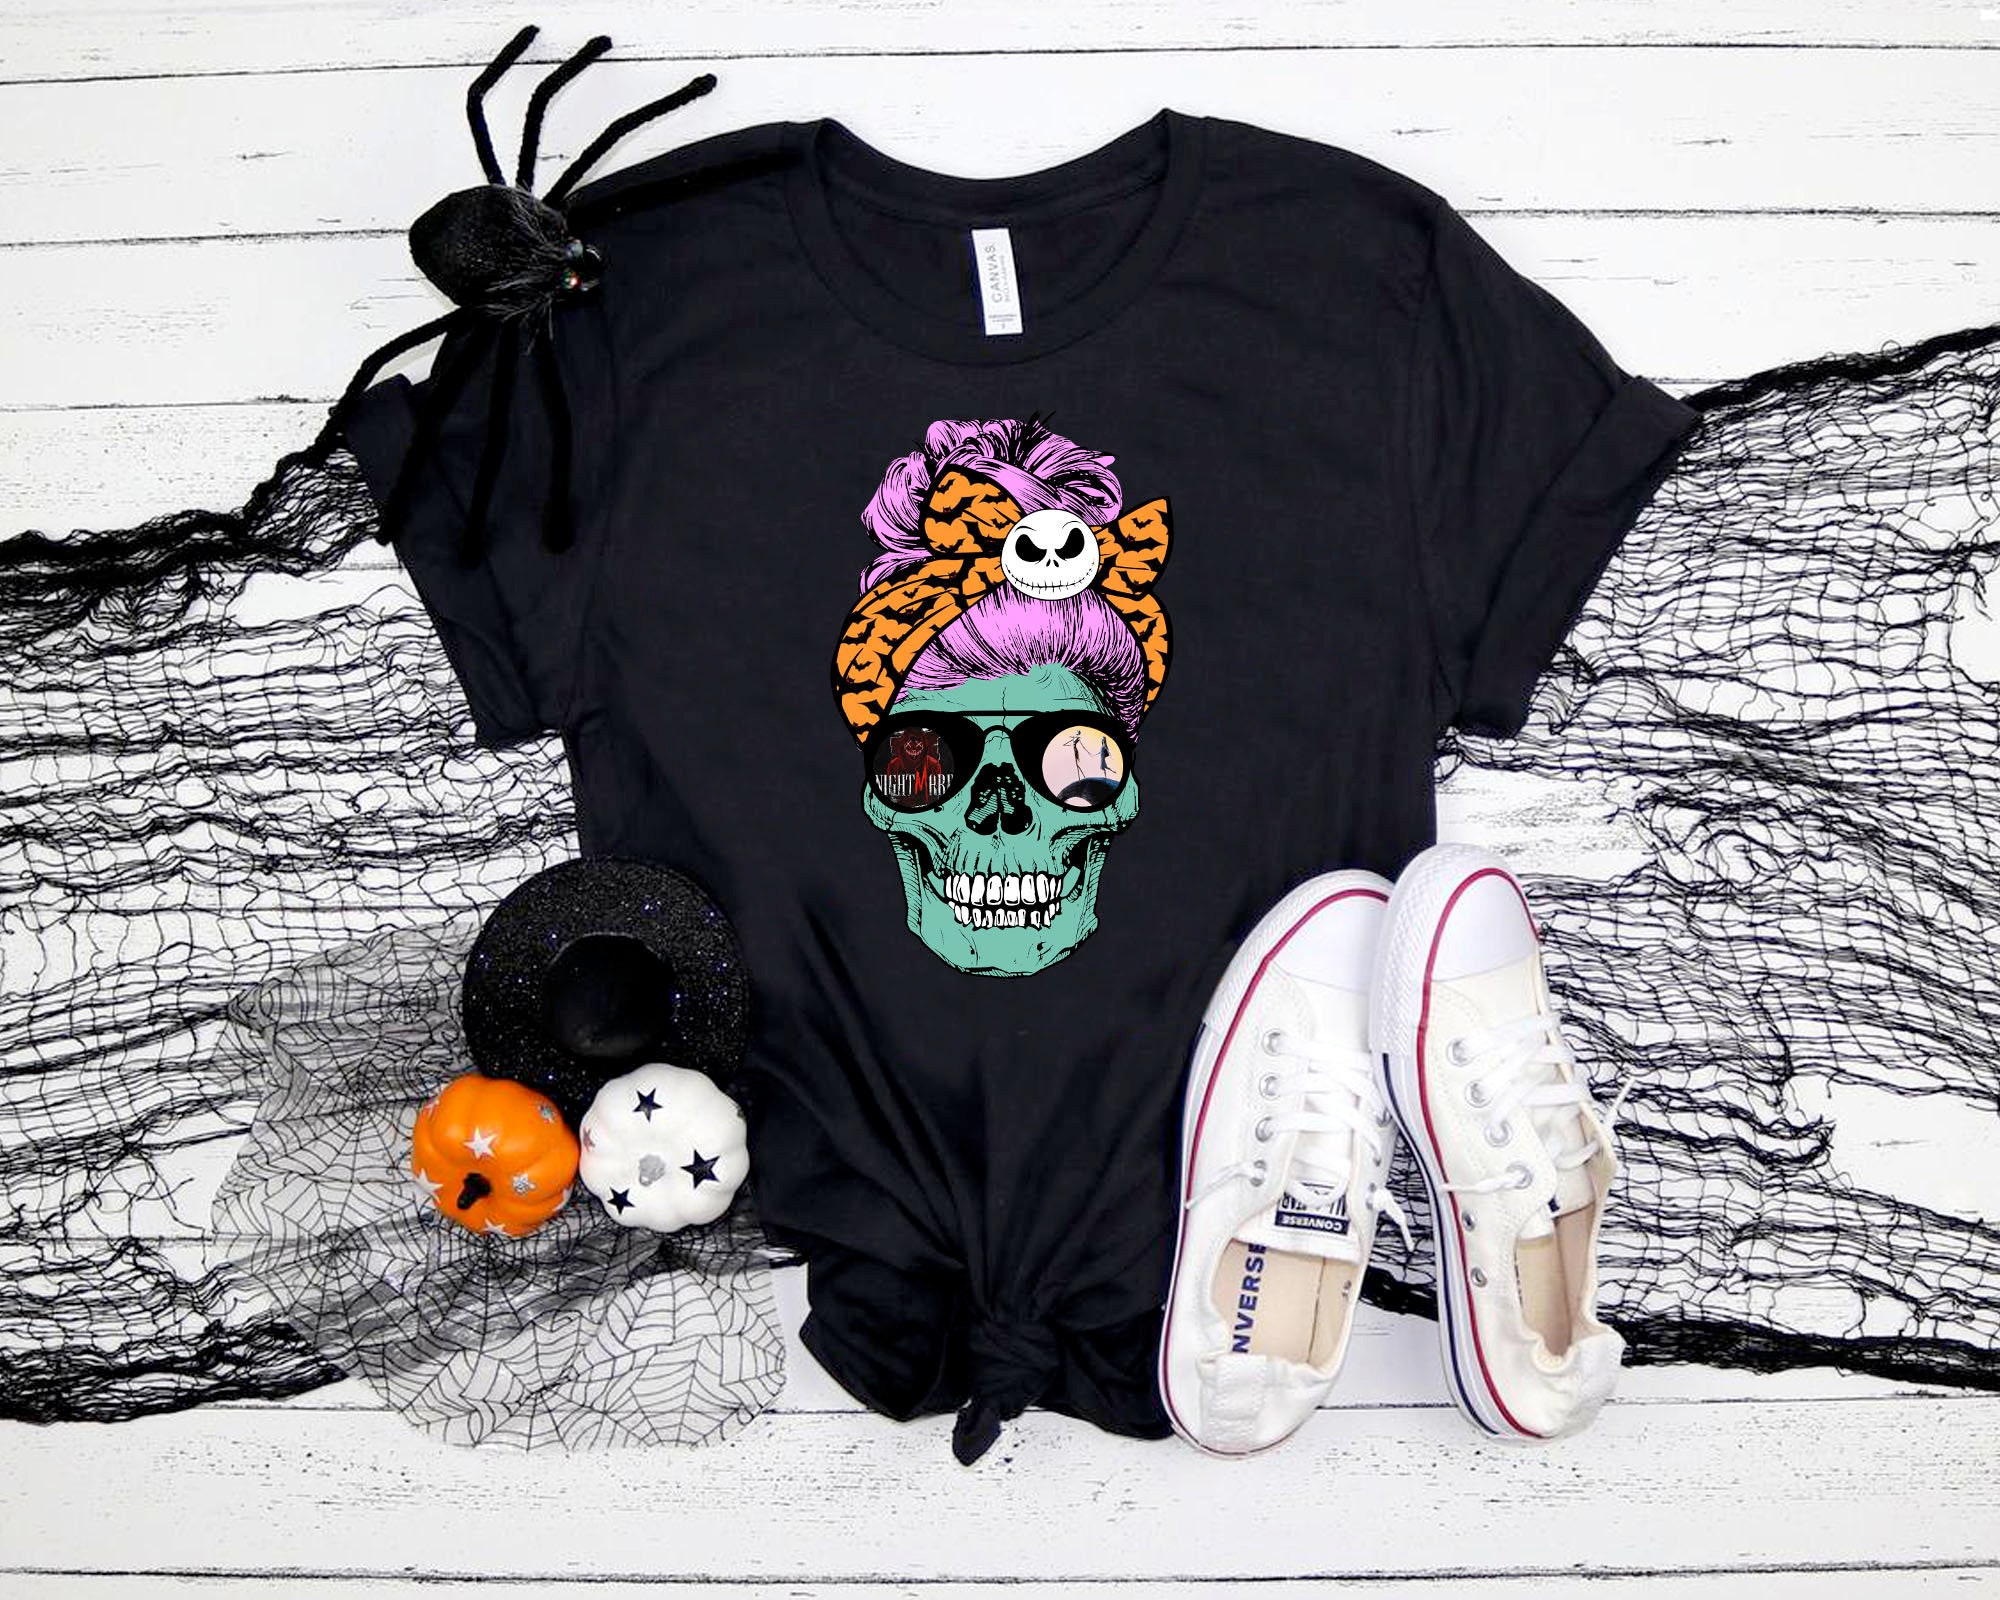 Skull Face With Sunglasses Shirt